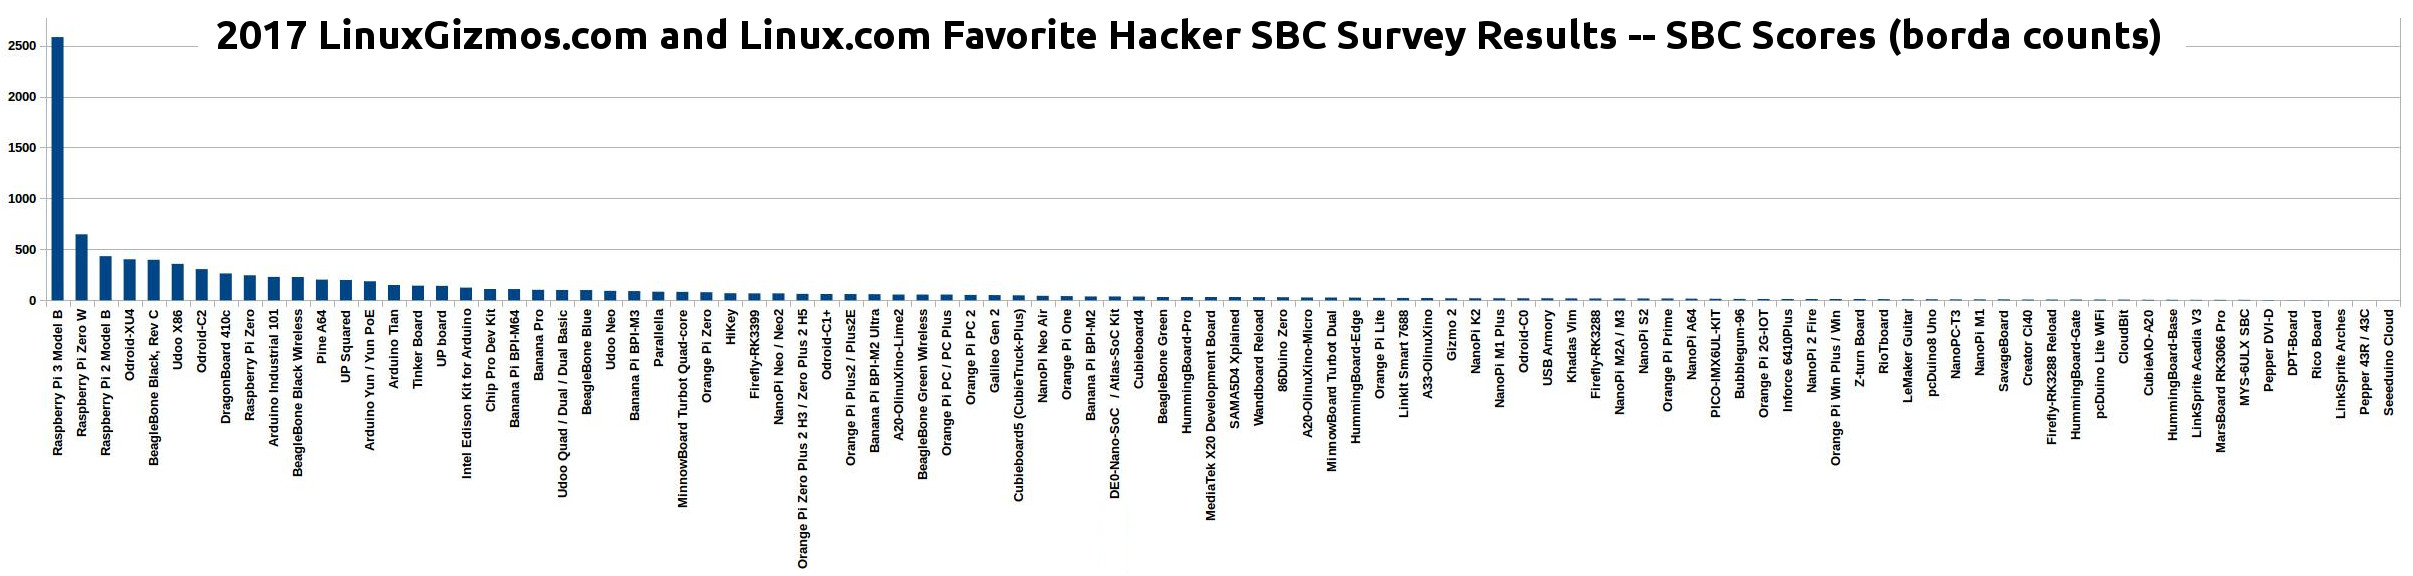 1.7K Voters Choose From about 100 SBC’s — The Results of Linuxgizmos 2017 Survey